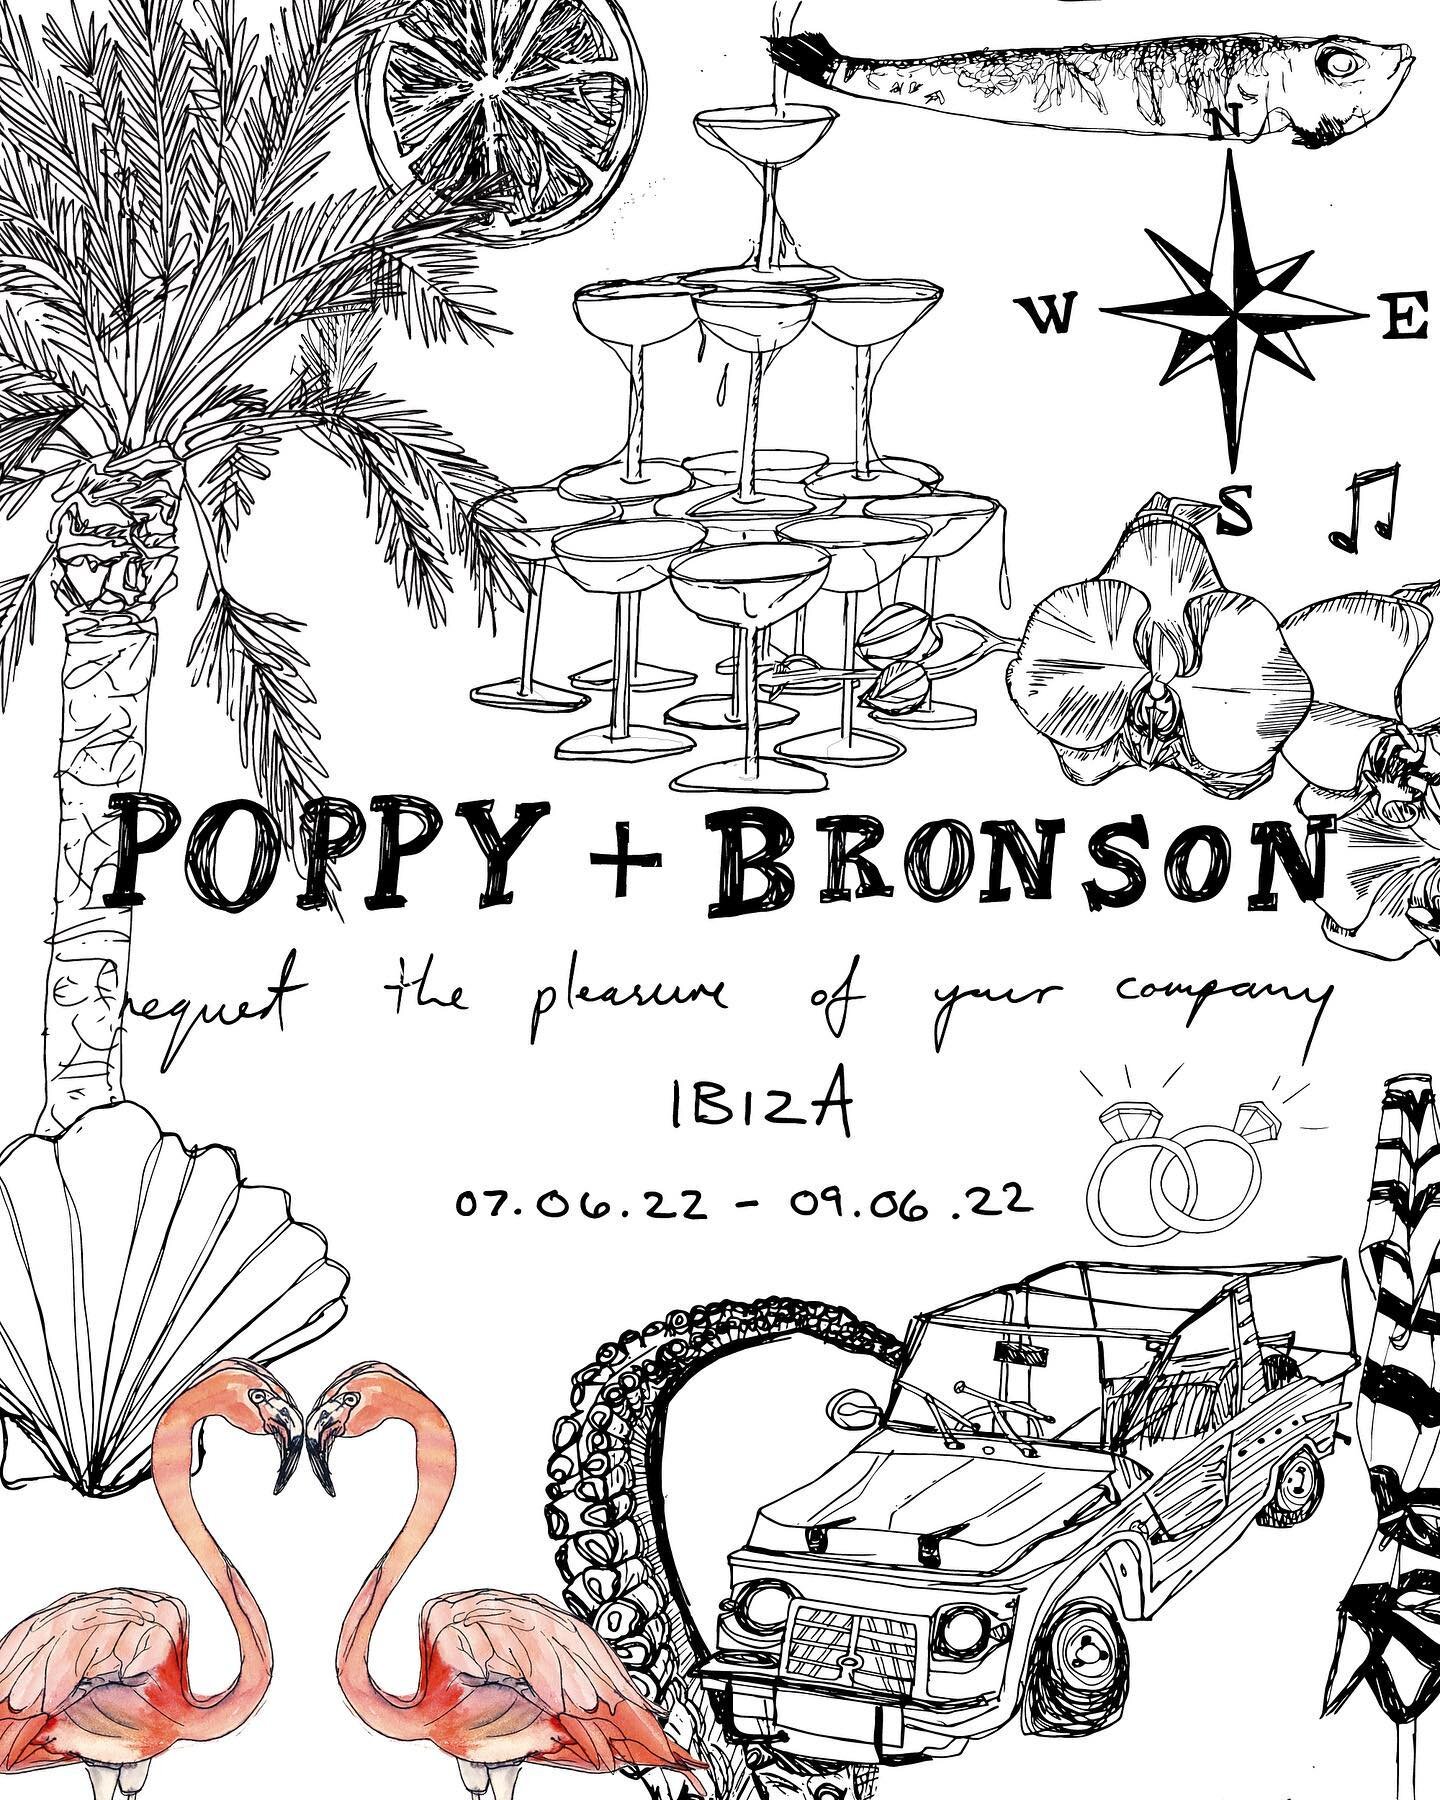 Poppy + Bronson 🌴 🐚 🥂 Loved designing this original and playful fold-out-map-style concept invitation for Poppy + Bronson who celebrated their wedding with a 3 day affair in Ibiza. Invitation was complete with a double sided travel-card style itin